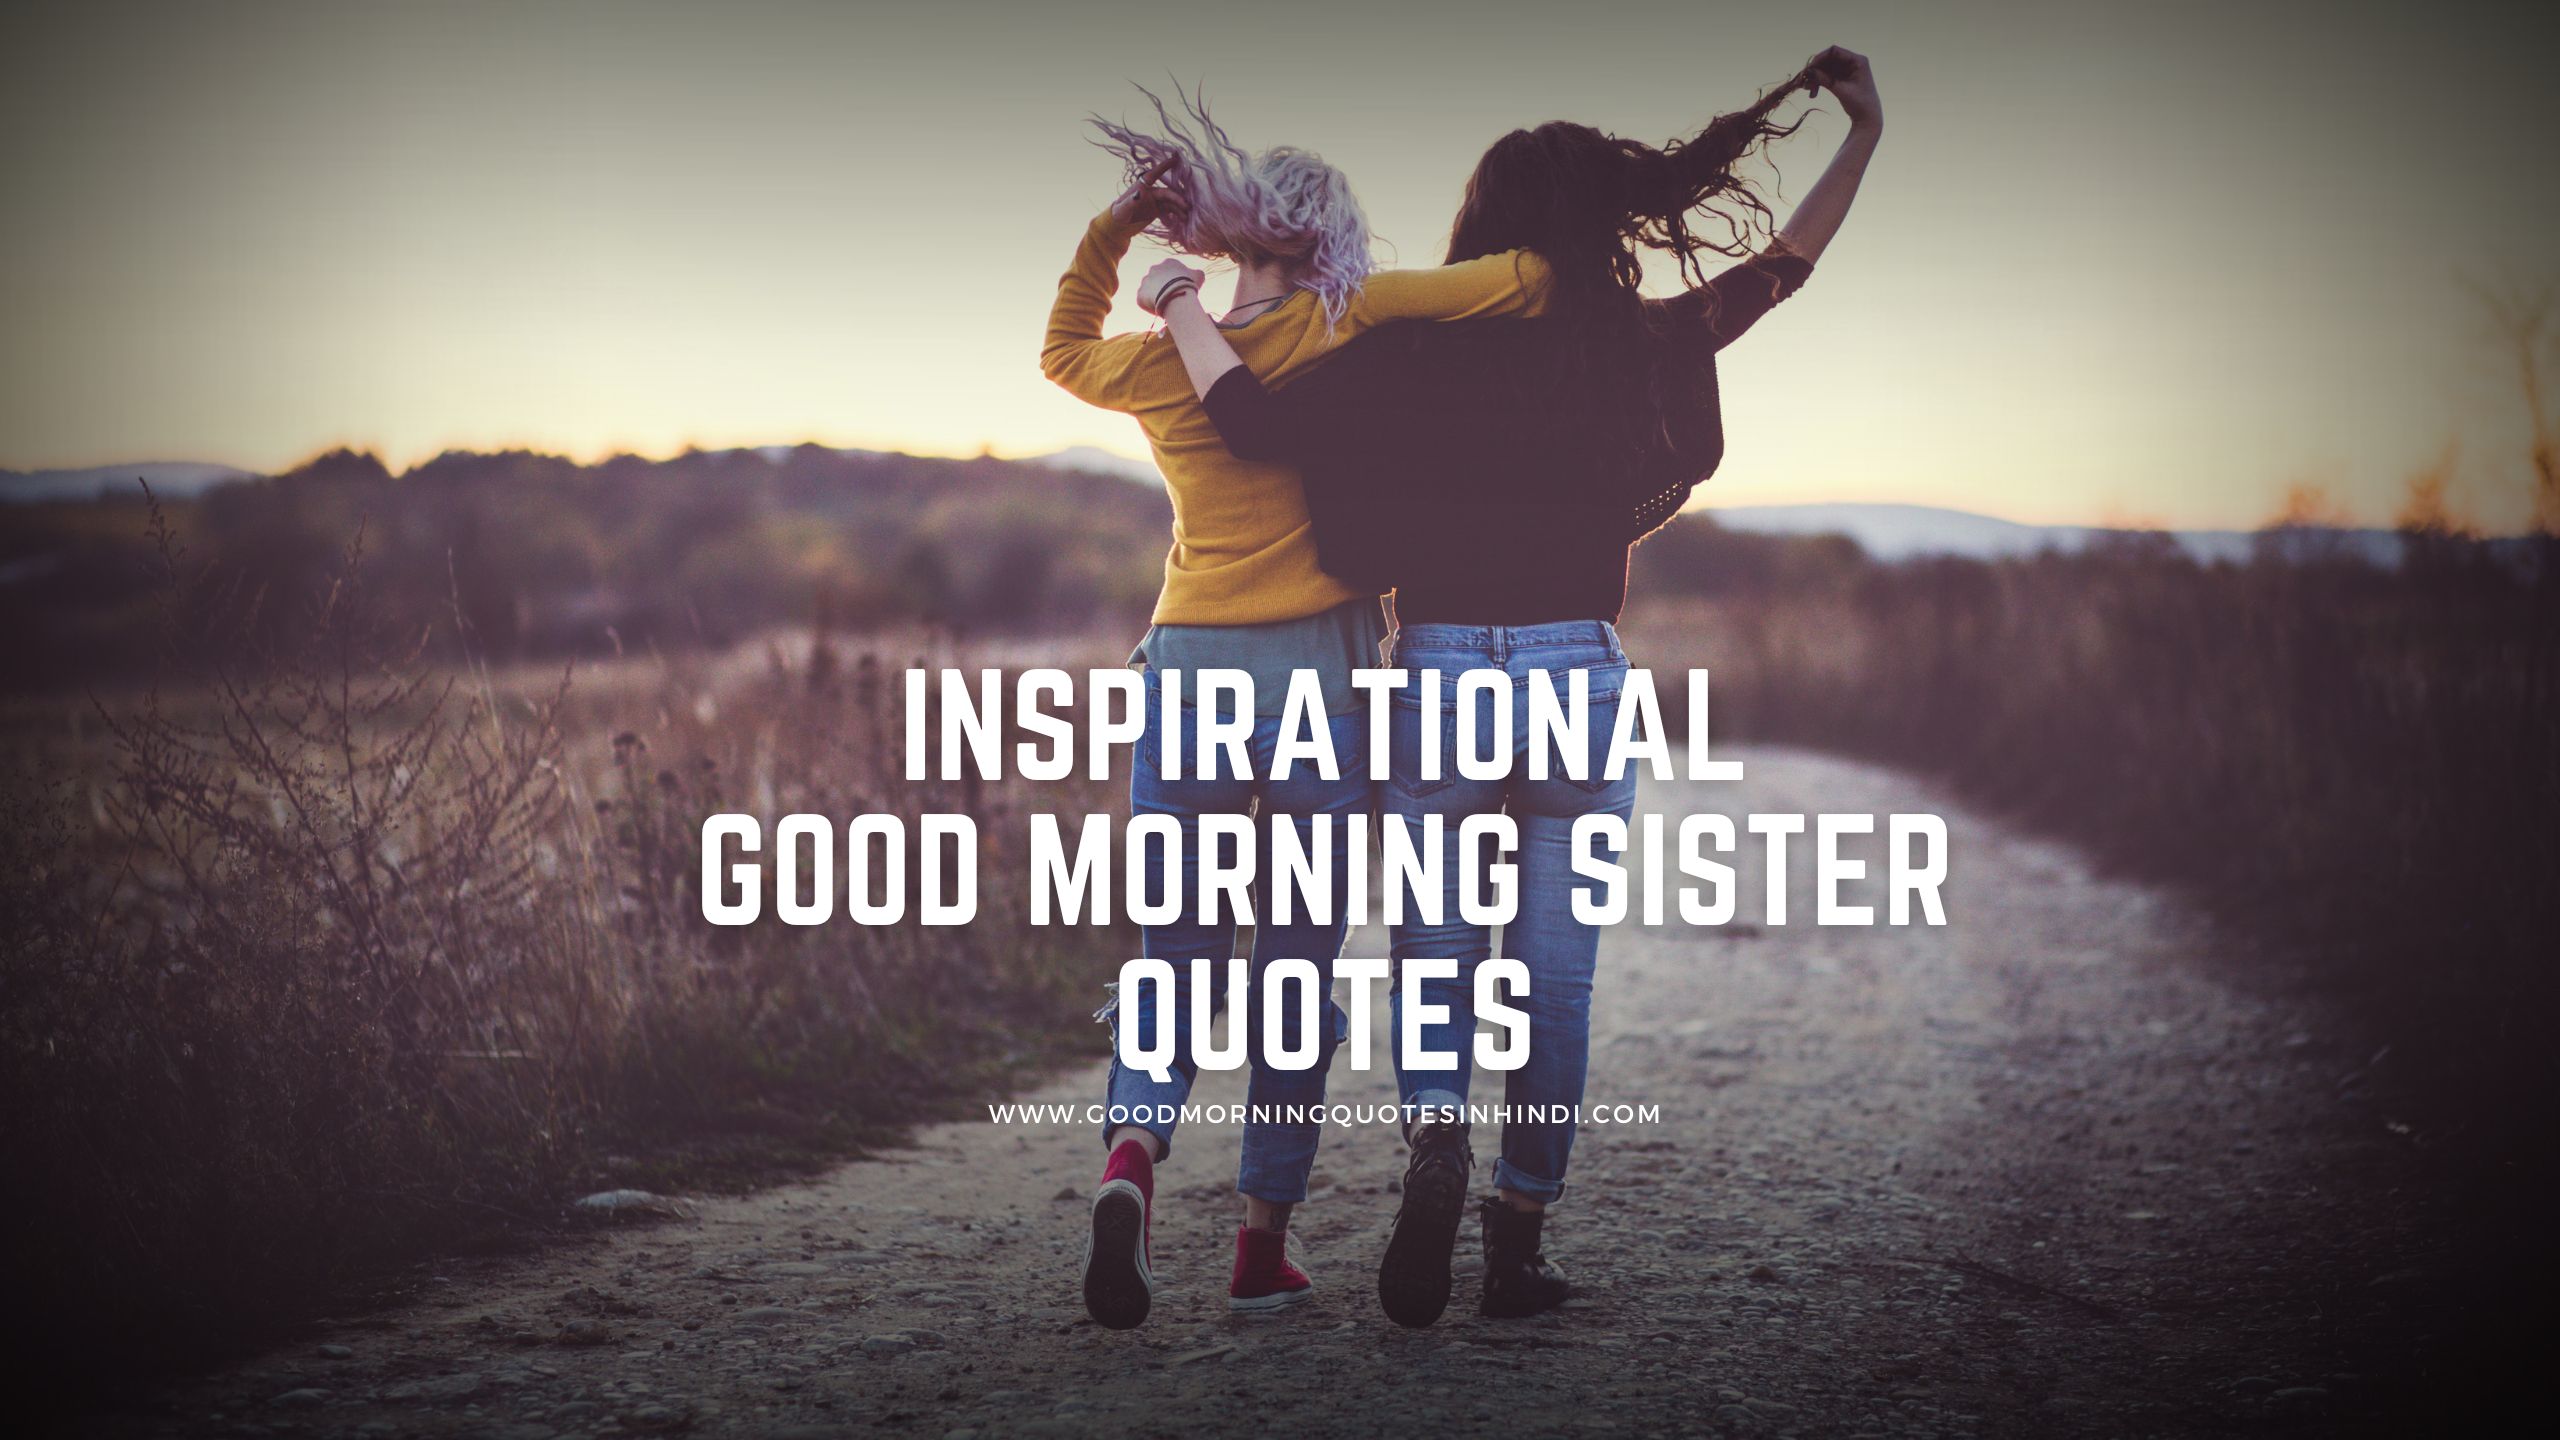 Inspirational Good Morning Sister Quotes